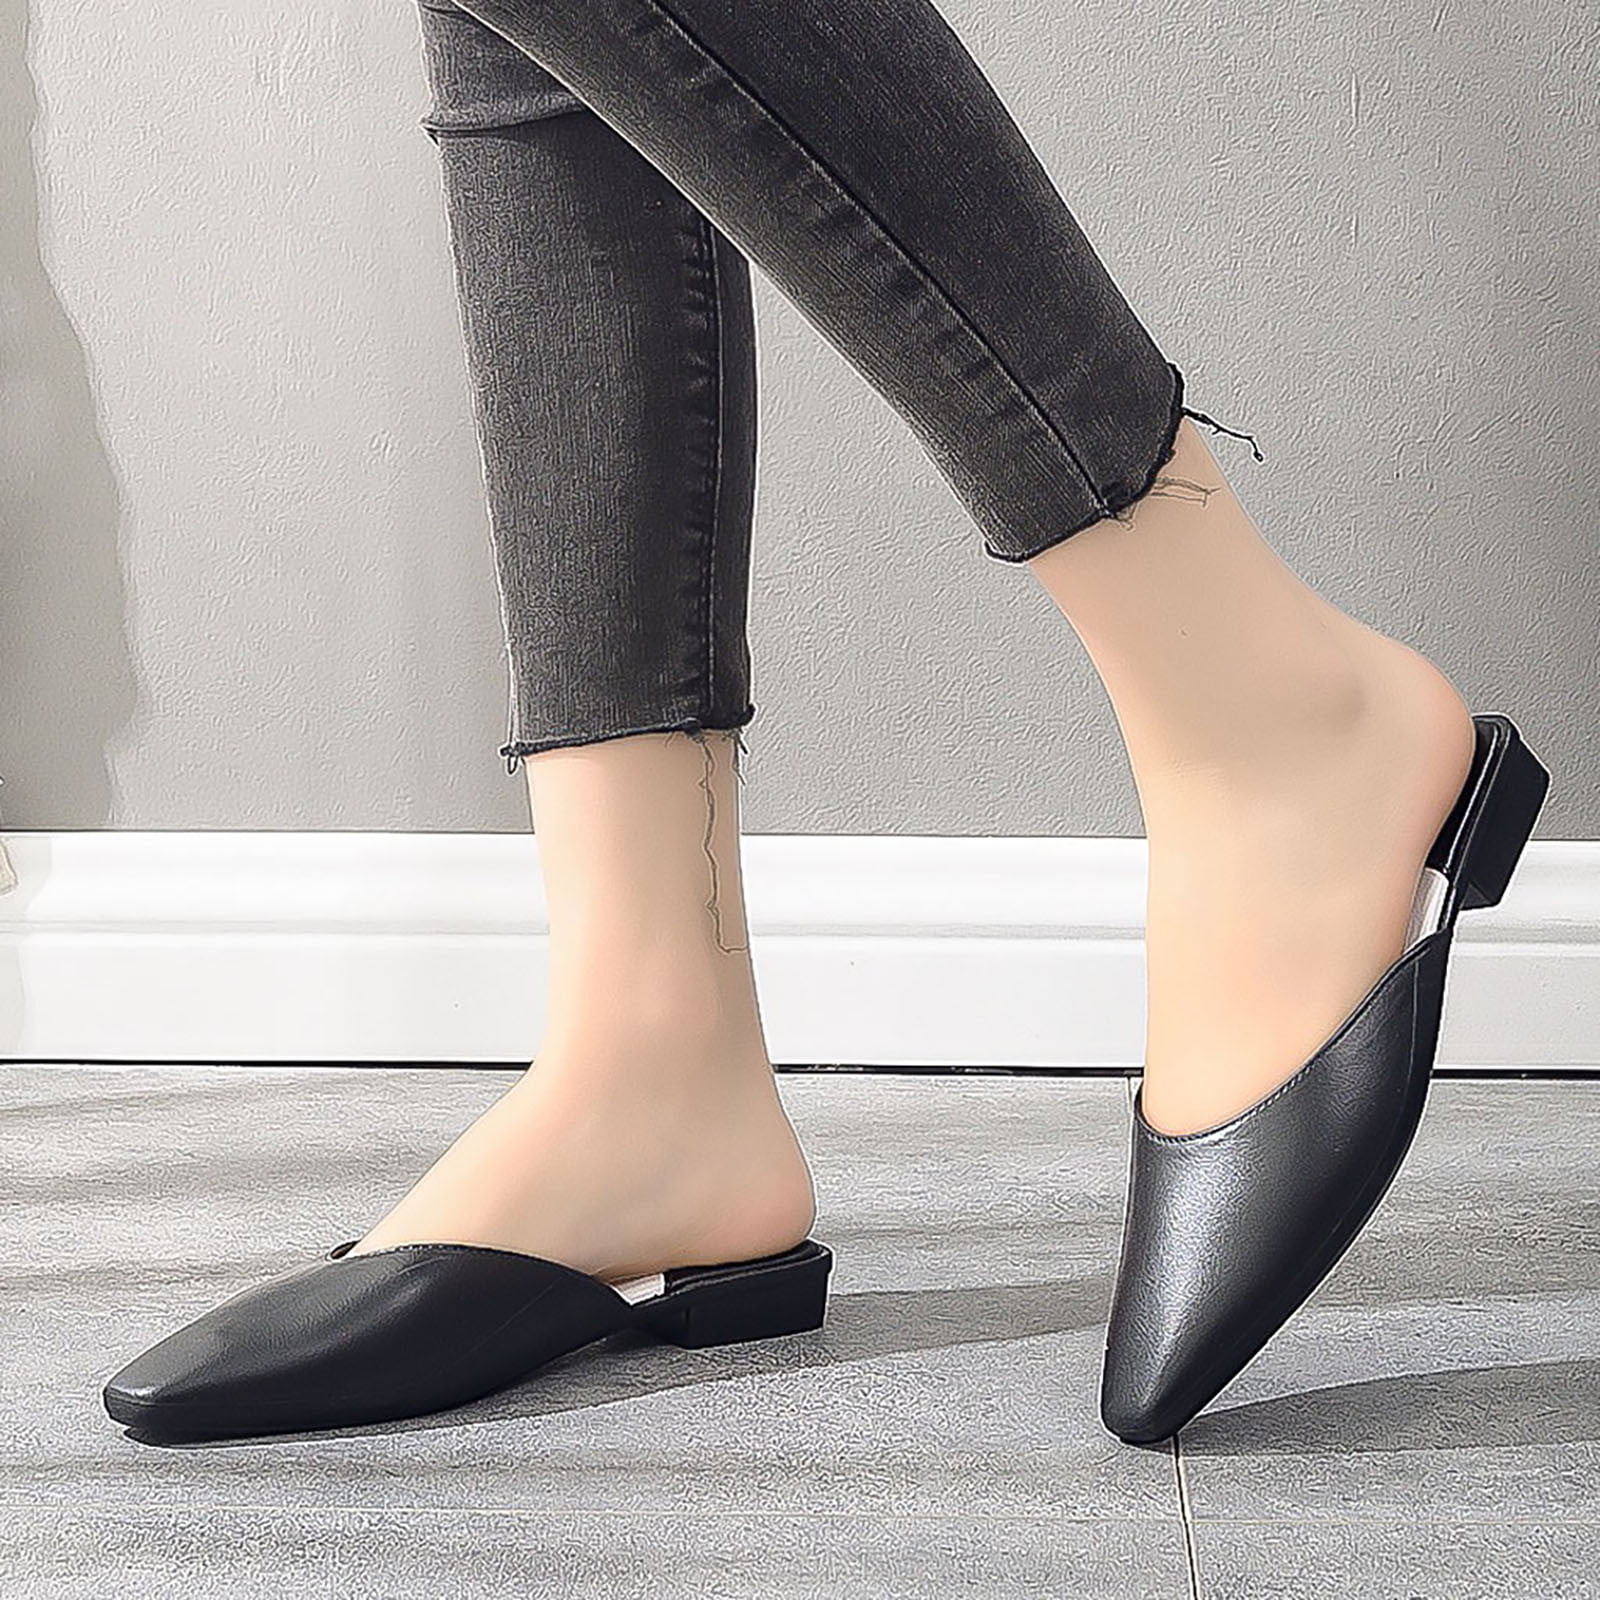 Fashion Women's Mules Slippers Shoes Cone High Heels Pointed Toe Pumps Sandals 